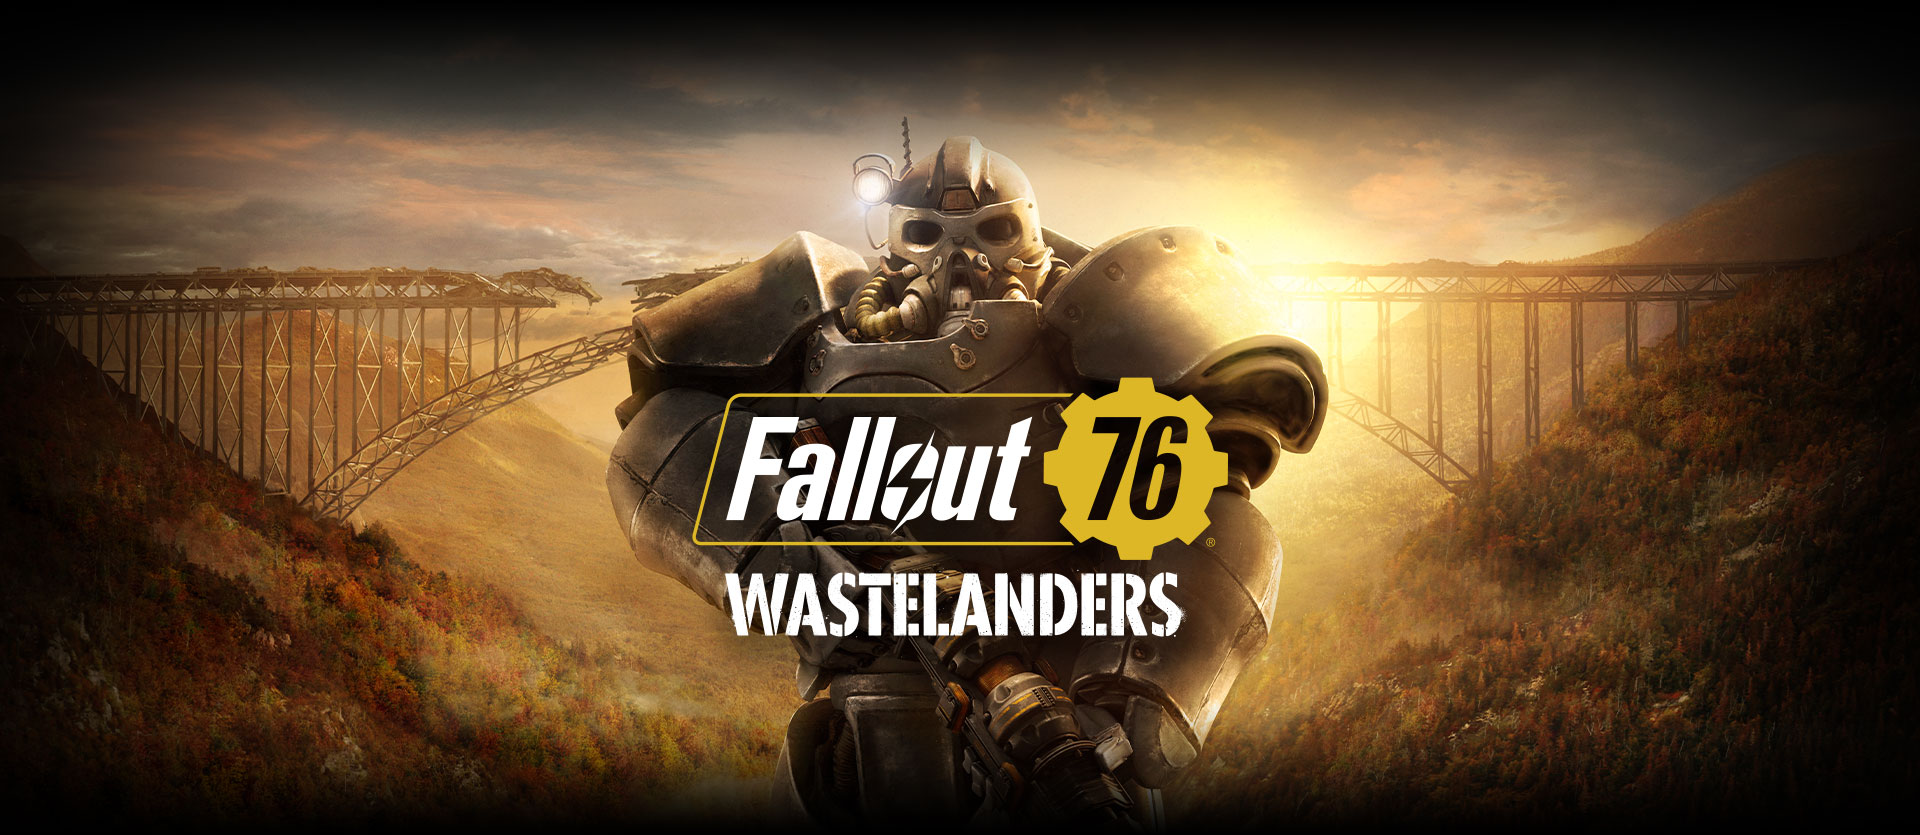 fallout-76-for-xbox-one-xbox